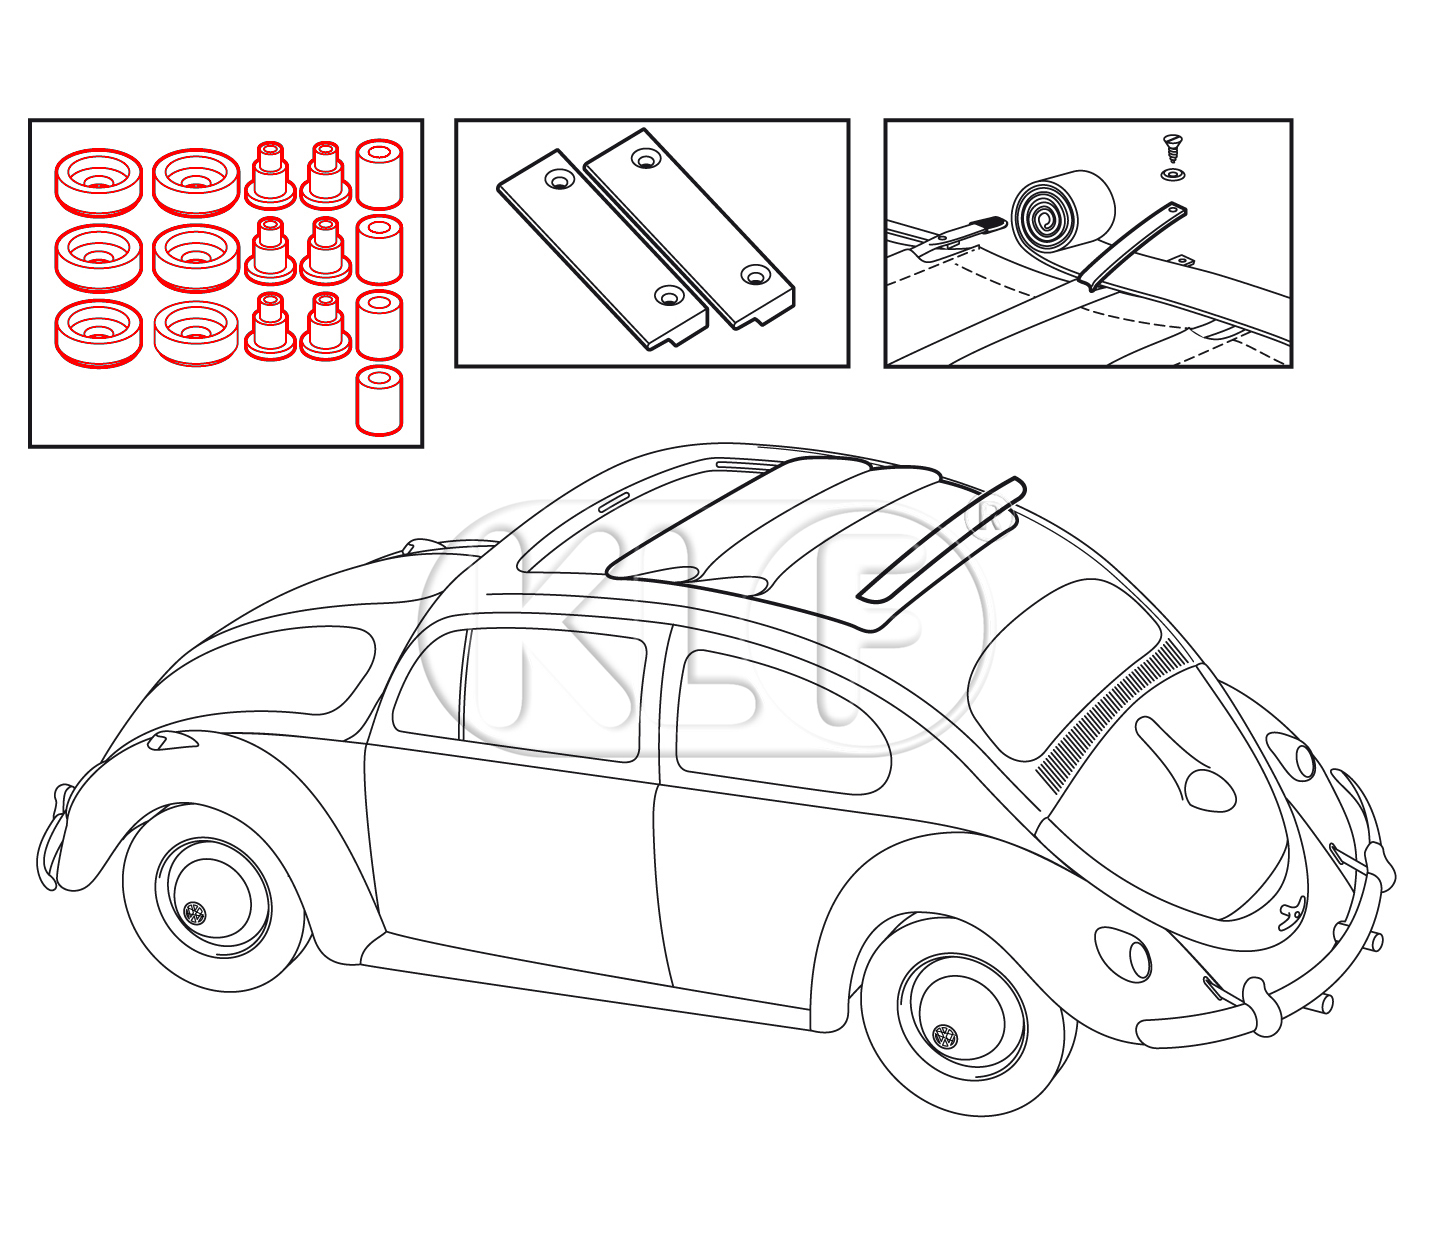 Roller Repair Kit for Sunroof, year 8/56 on